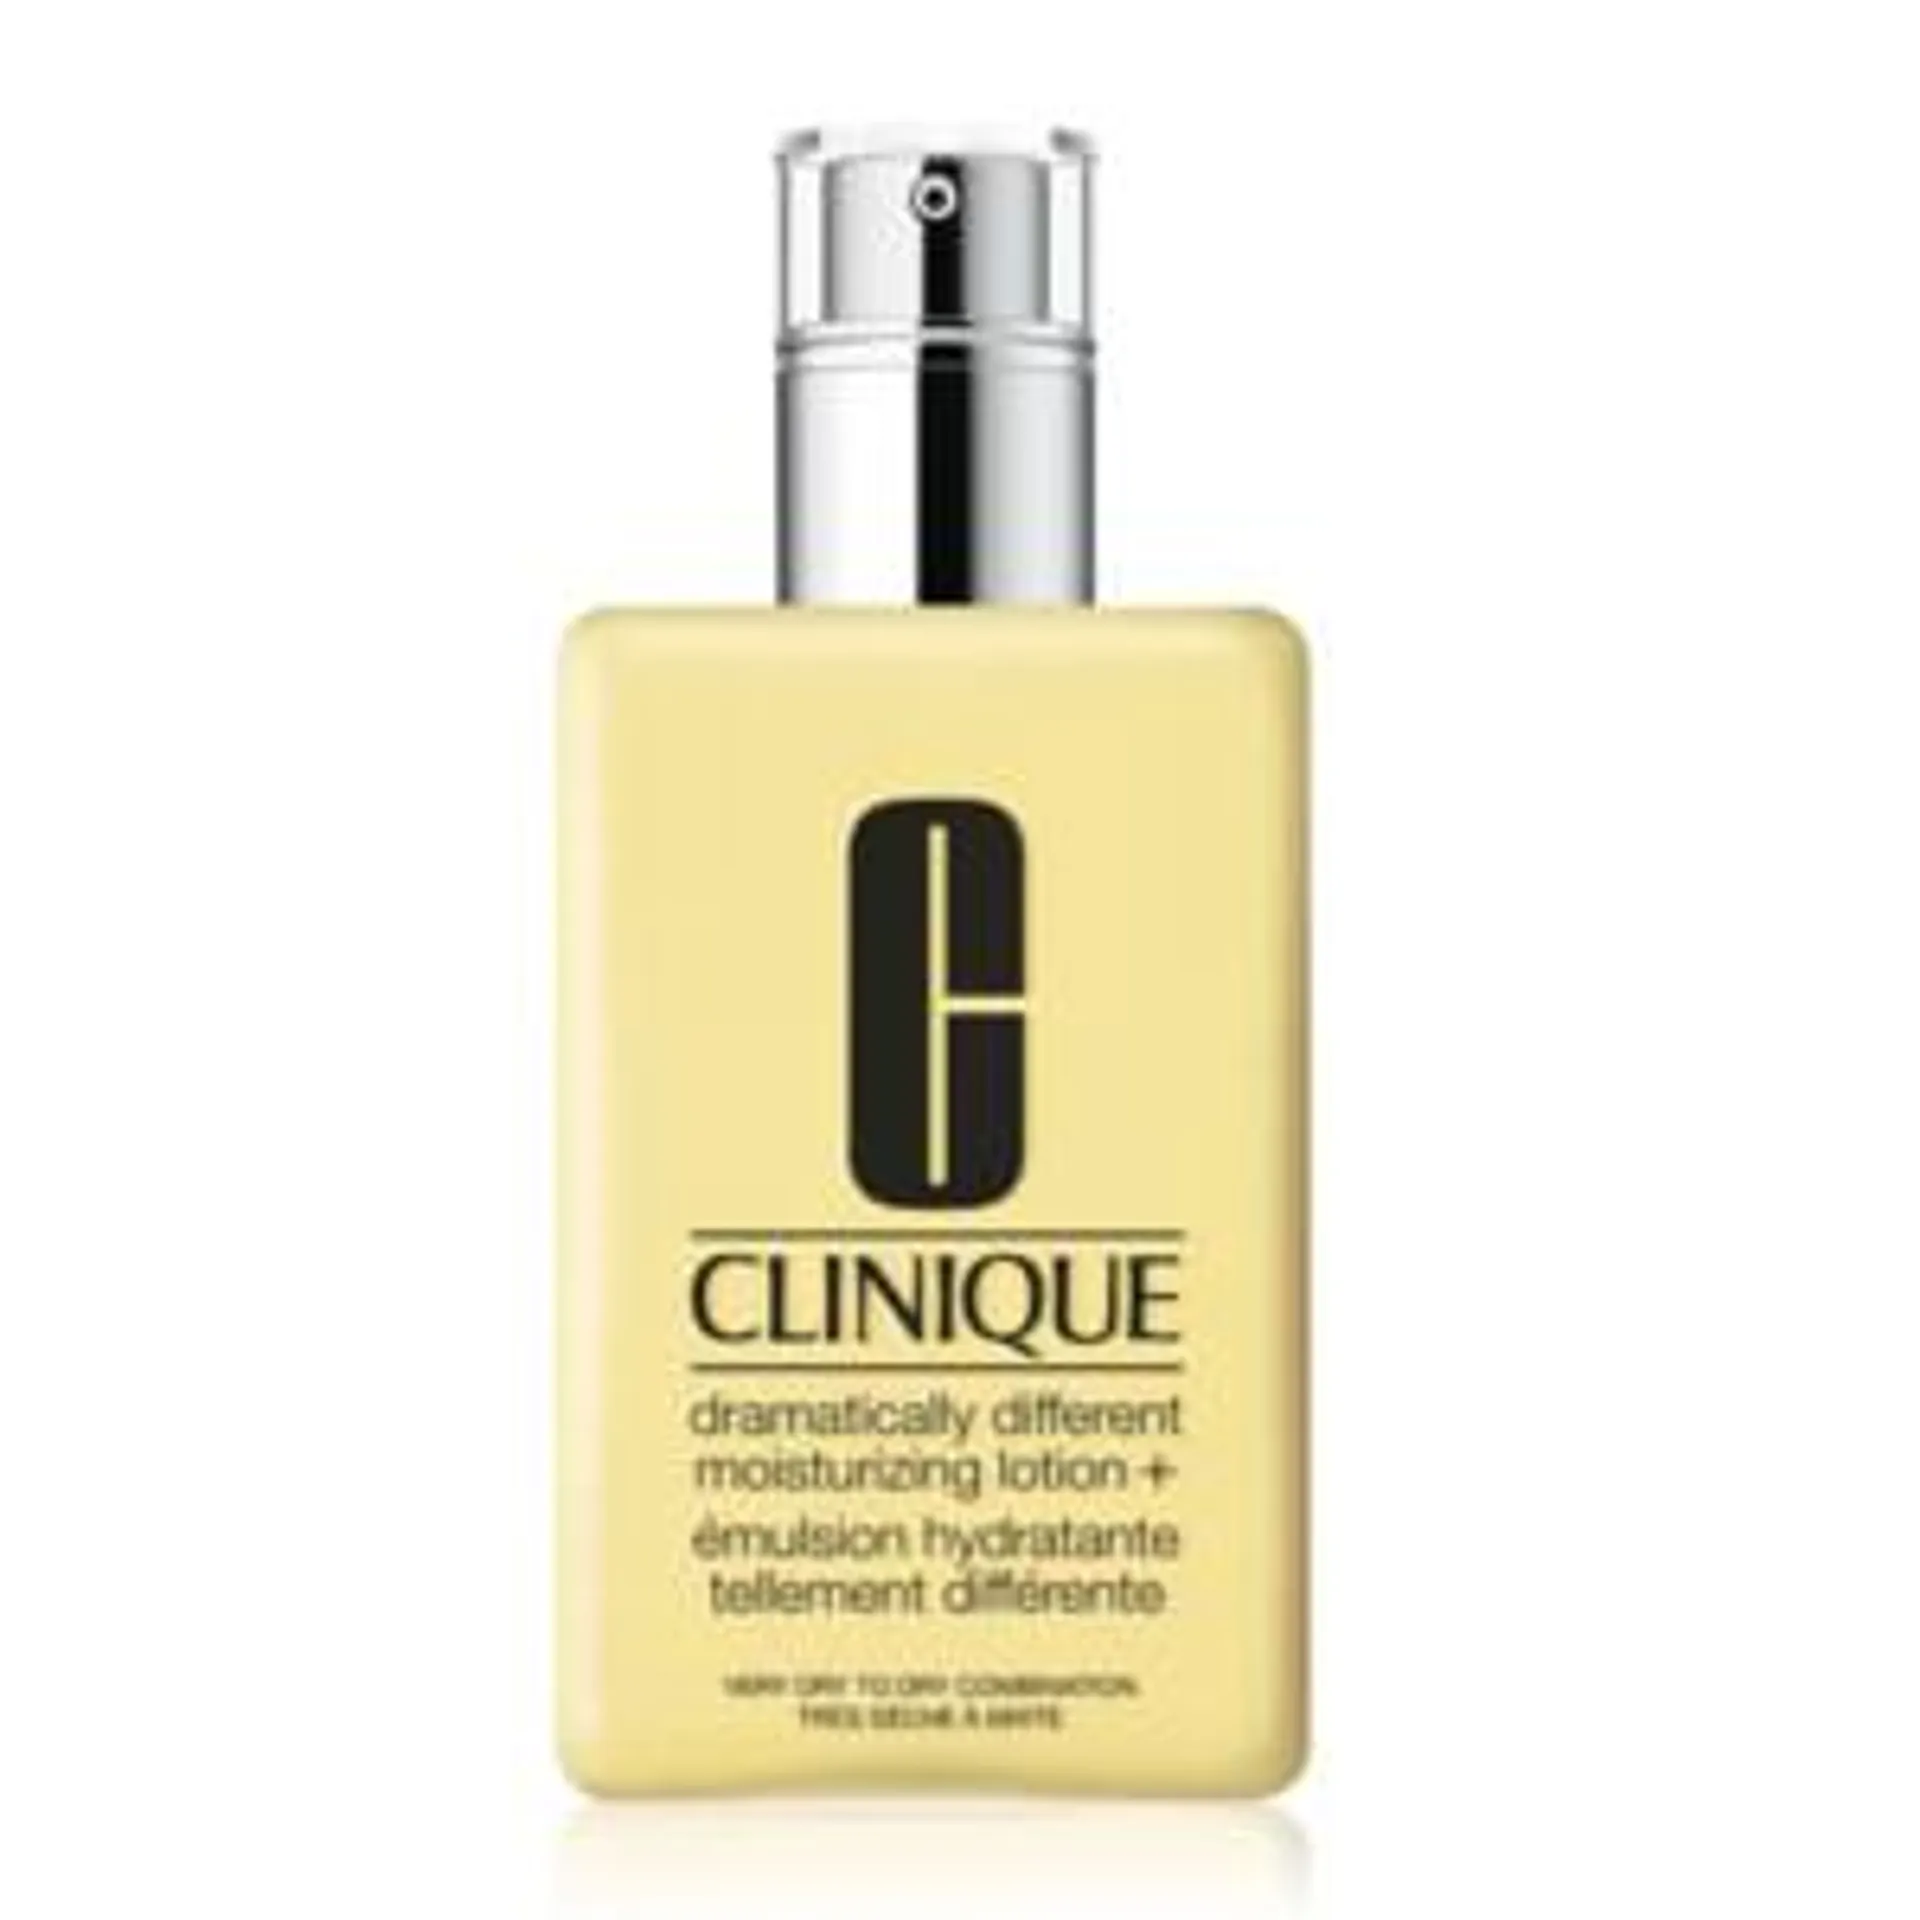 Clinique Dramatically Different Moisturizing Lotion + 125 ml